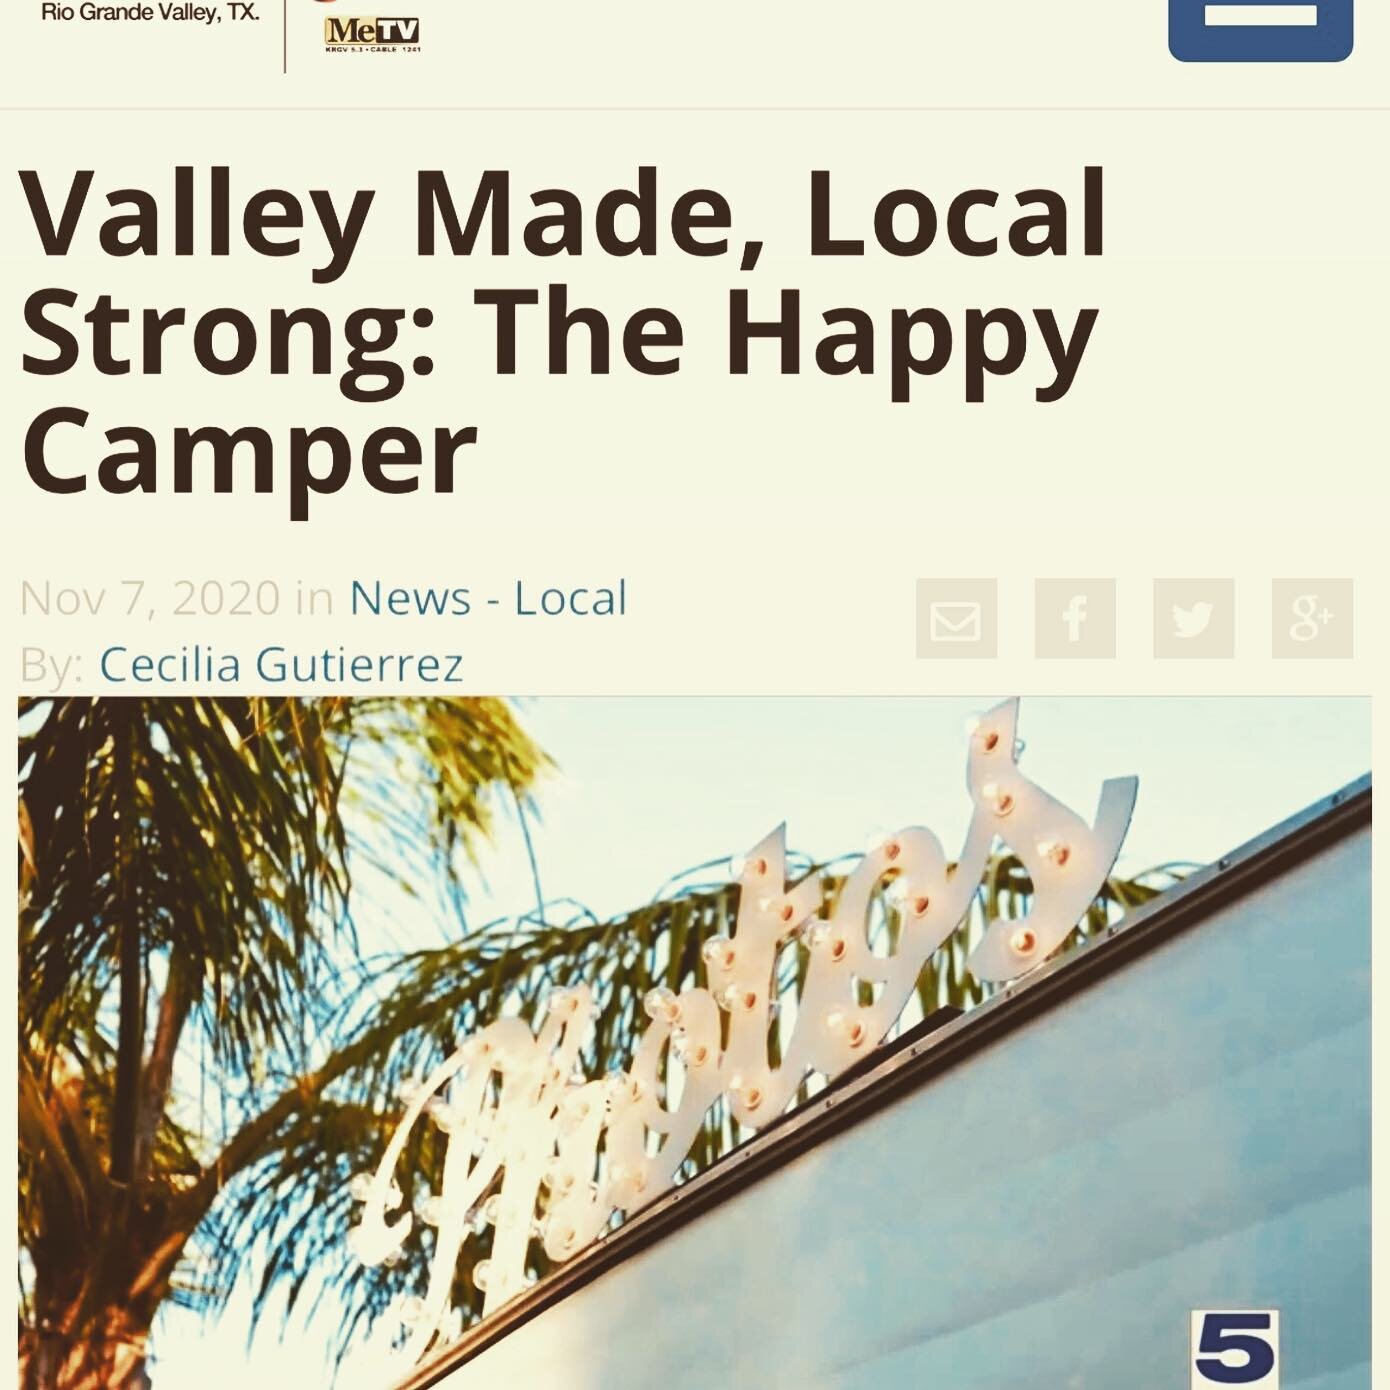 valley-made-strong-happy-camper-mobile-photo-booth.jpg